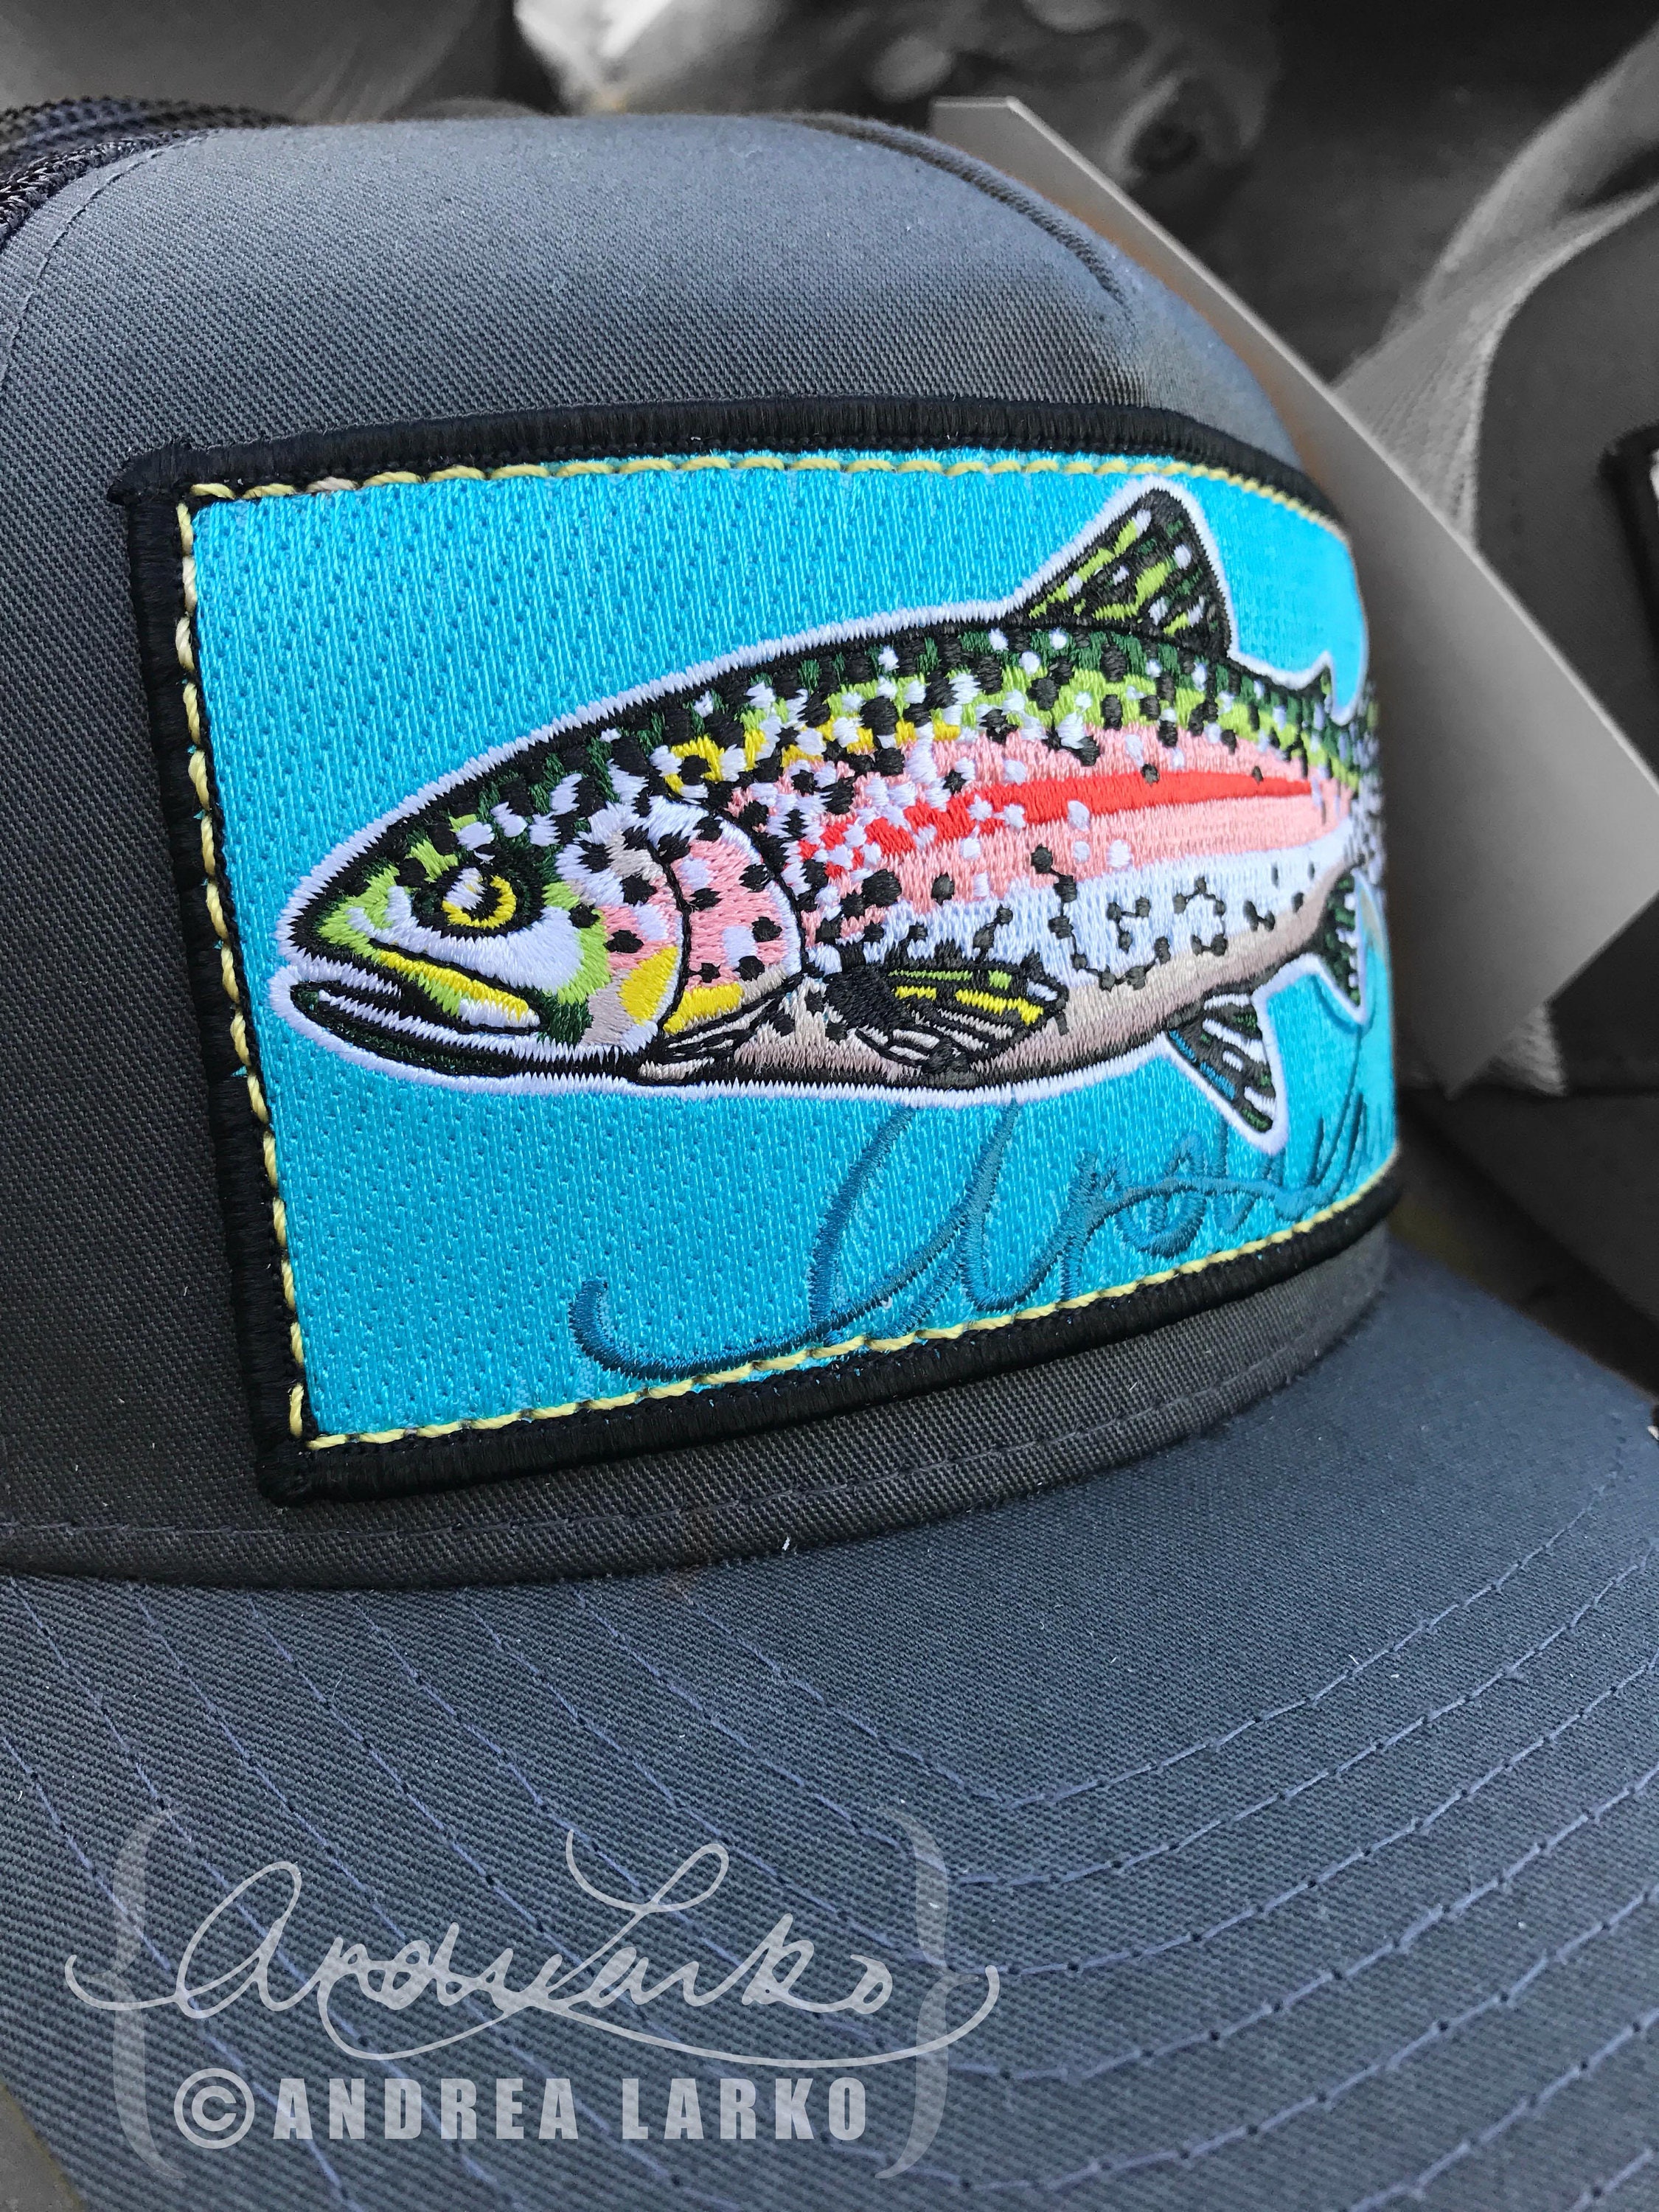 Andrea Larko on Instagram: Limited edition smallmouth bass hats